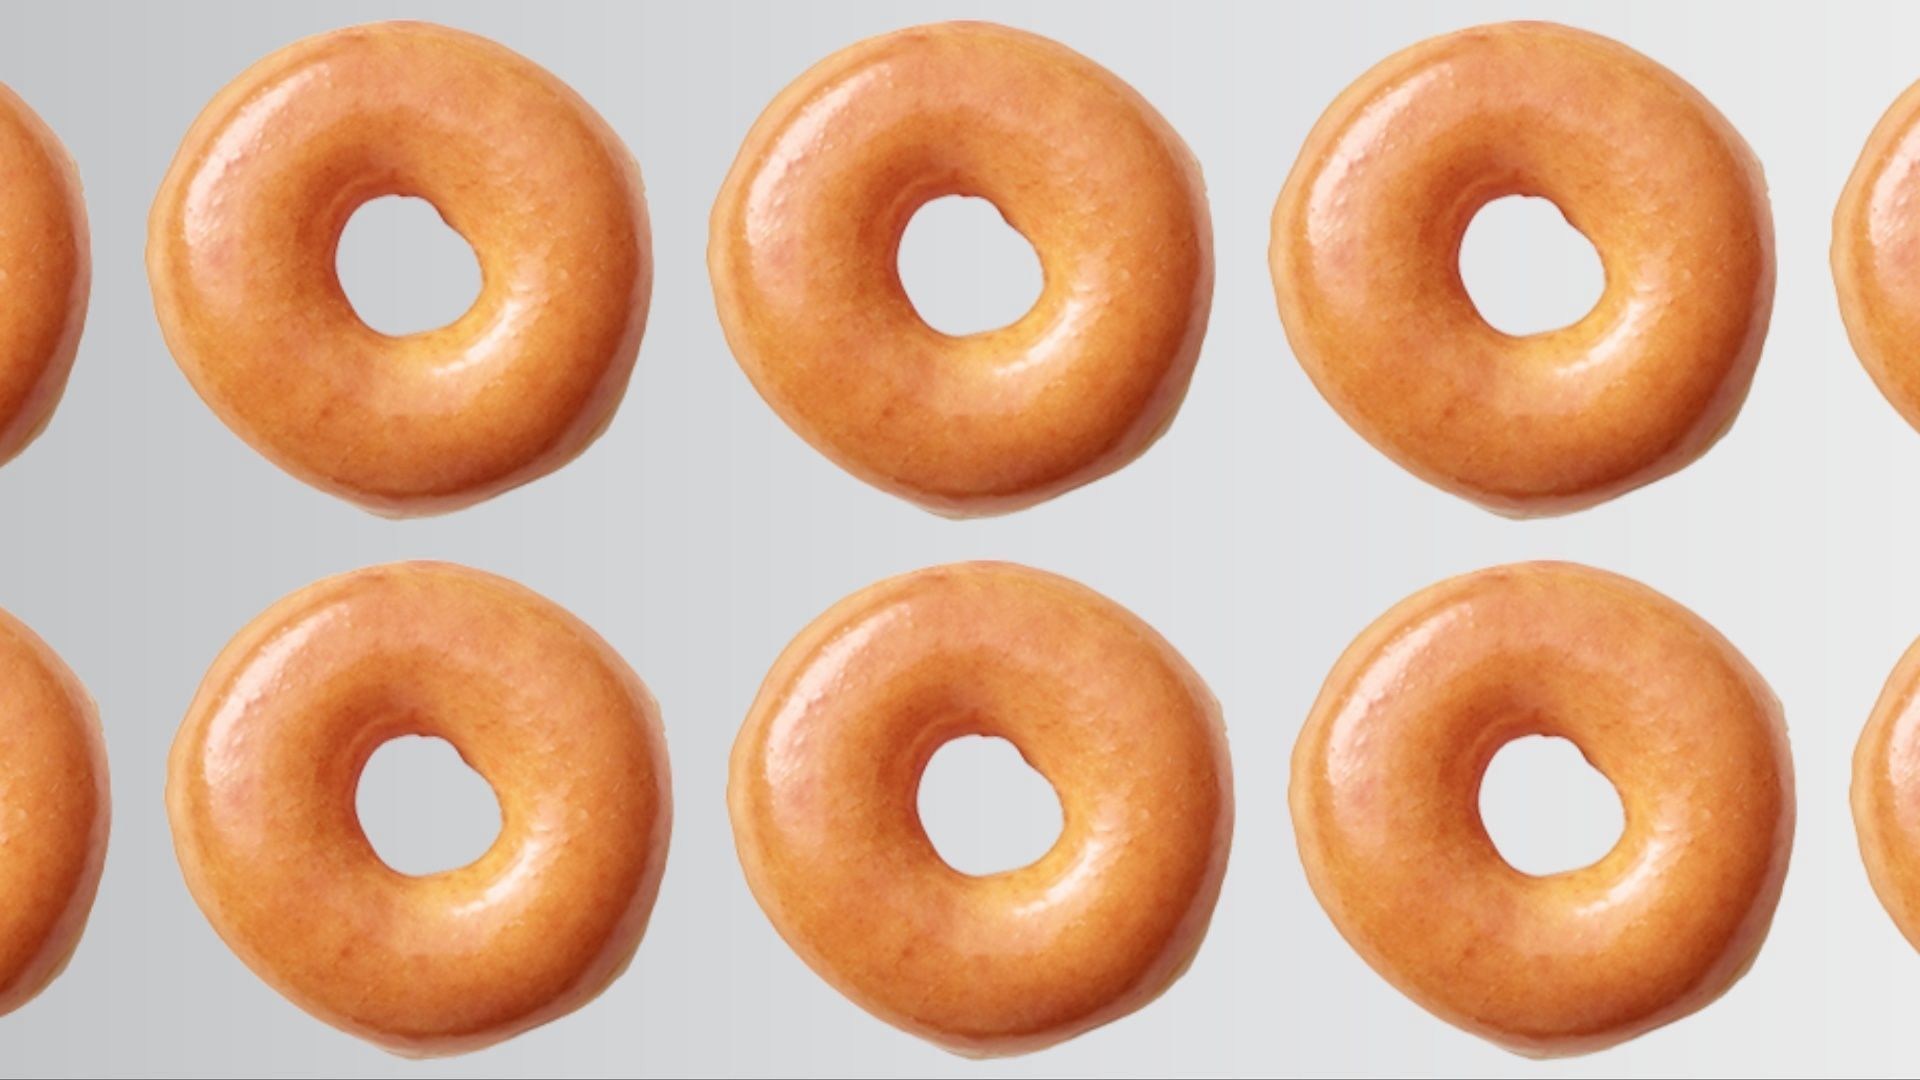 Fans can enjoy a limited-time deal on the fan-favorite Original Glazed&reg; dozens this Friday as the doughnuts and coffeehouse chain celebrates its 86th birthday on July 14 (Image via Krispy Kreme)